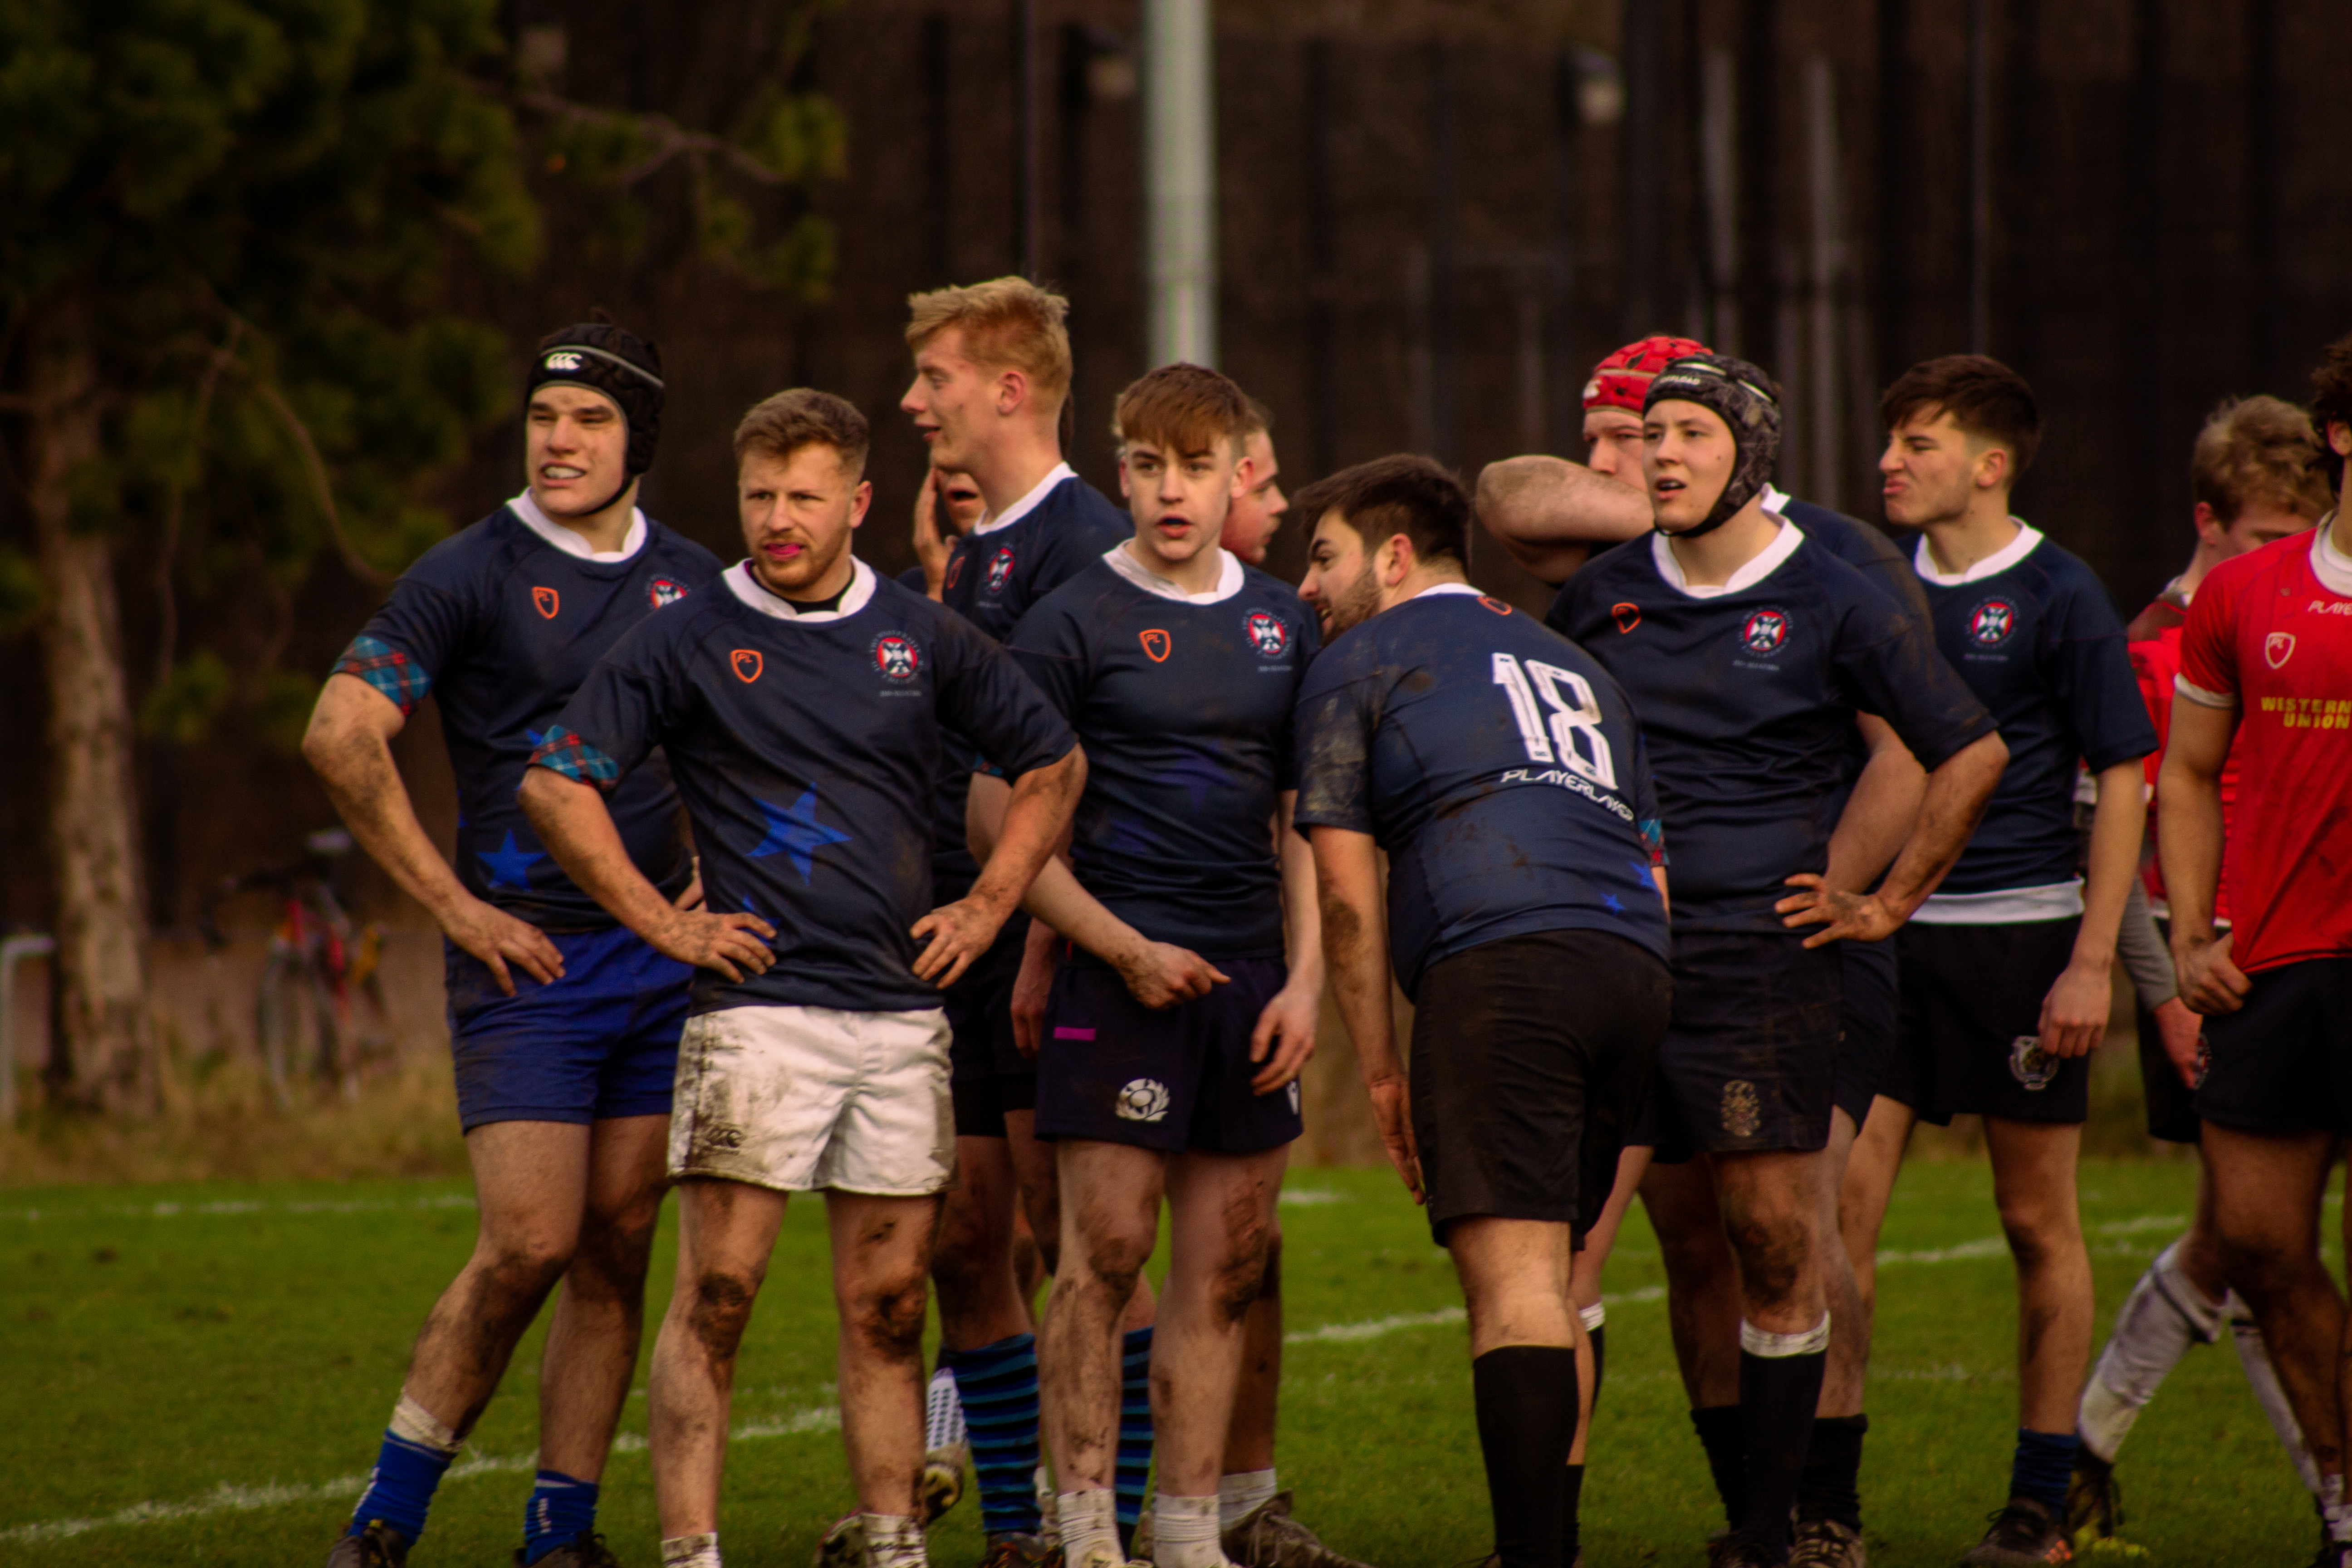 Intramural all-stars rugby team wearing dark blue shirs standing together looking at something behind and to the left of the camera